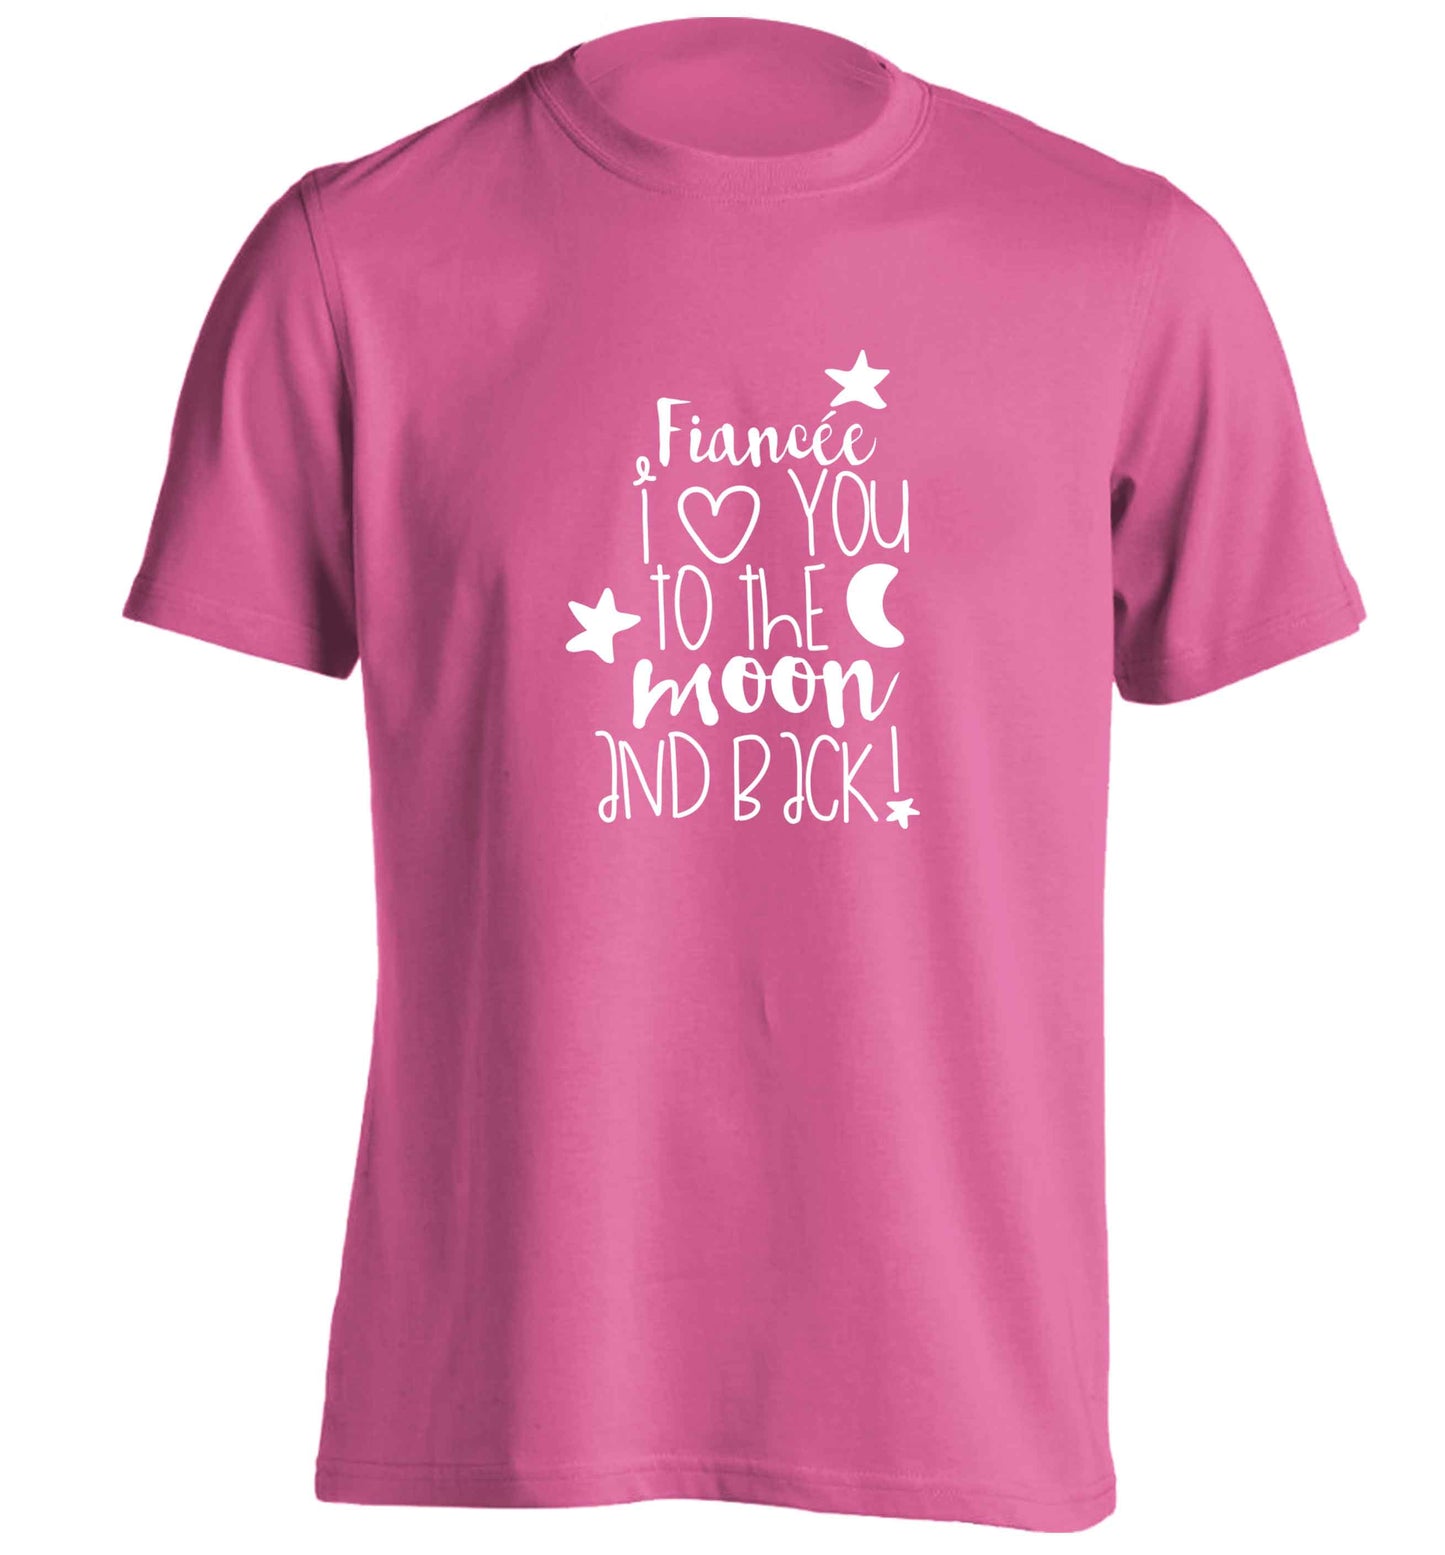 Fianc√©e I love you to the moon and back adults unisex pink Tshirt 2XL